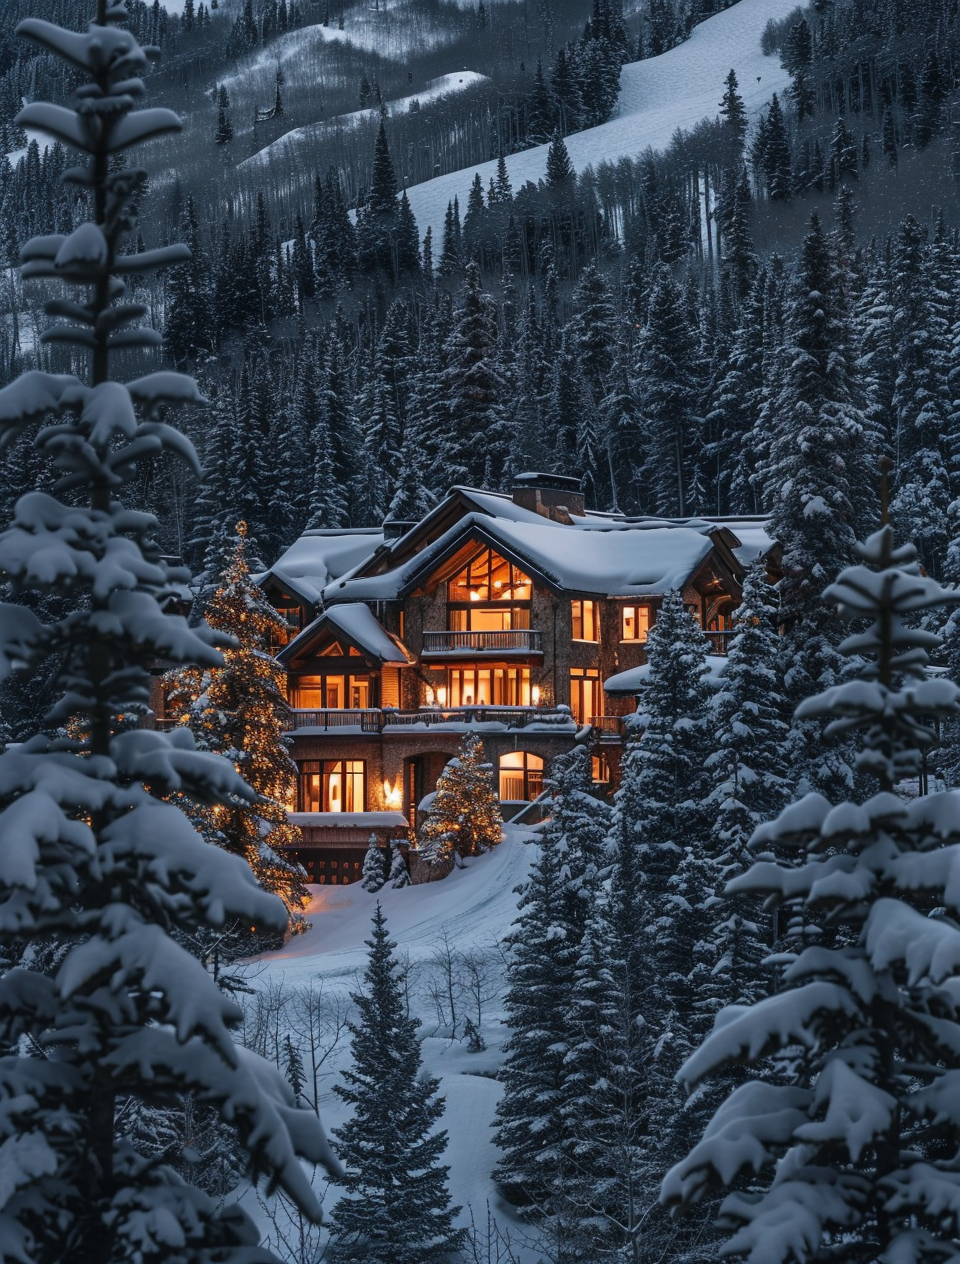 Luxurious Home in Snowy Mountain 2.0